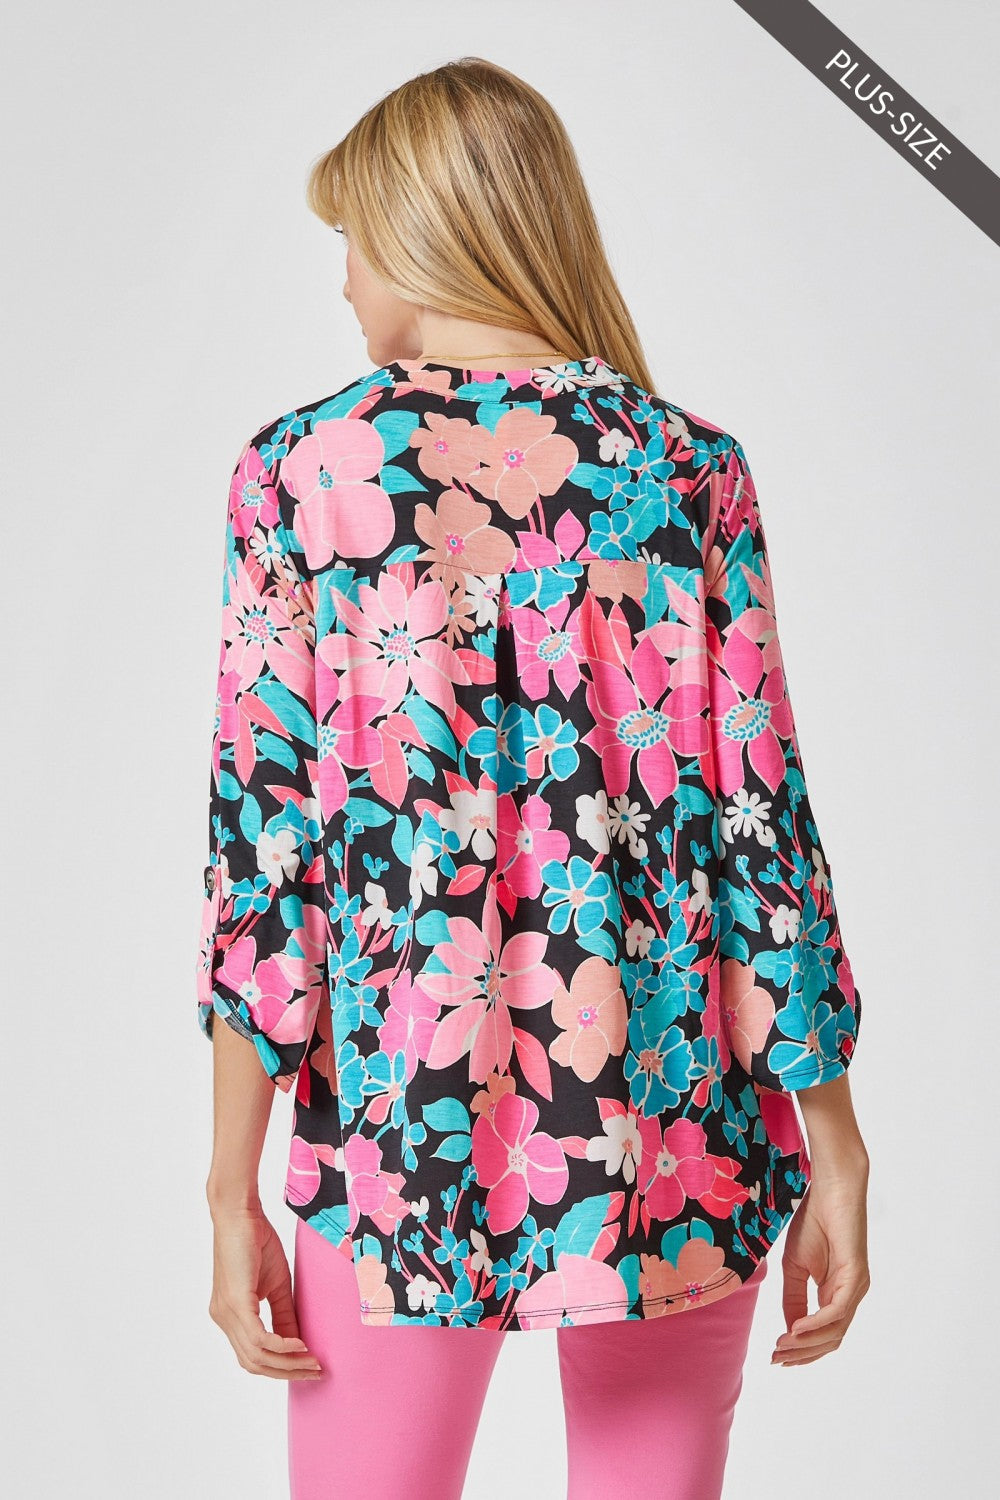 Turquoise & Pink on Black Lizzy Top